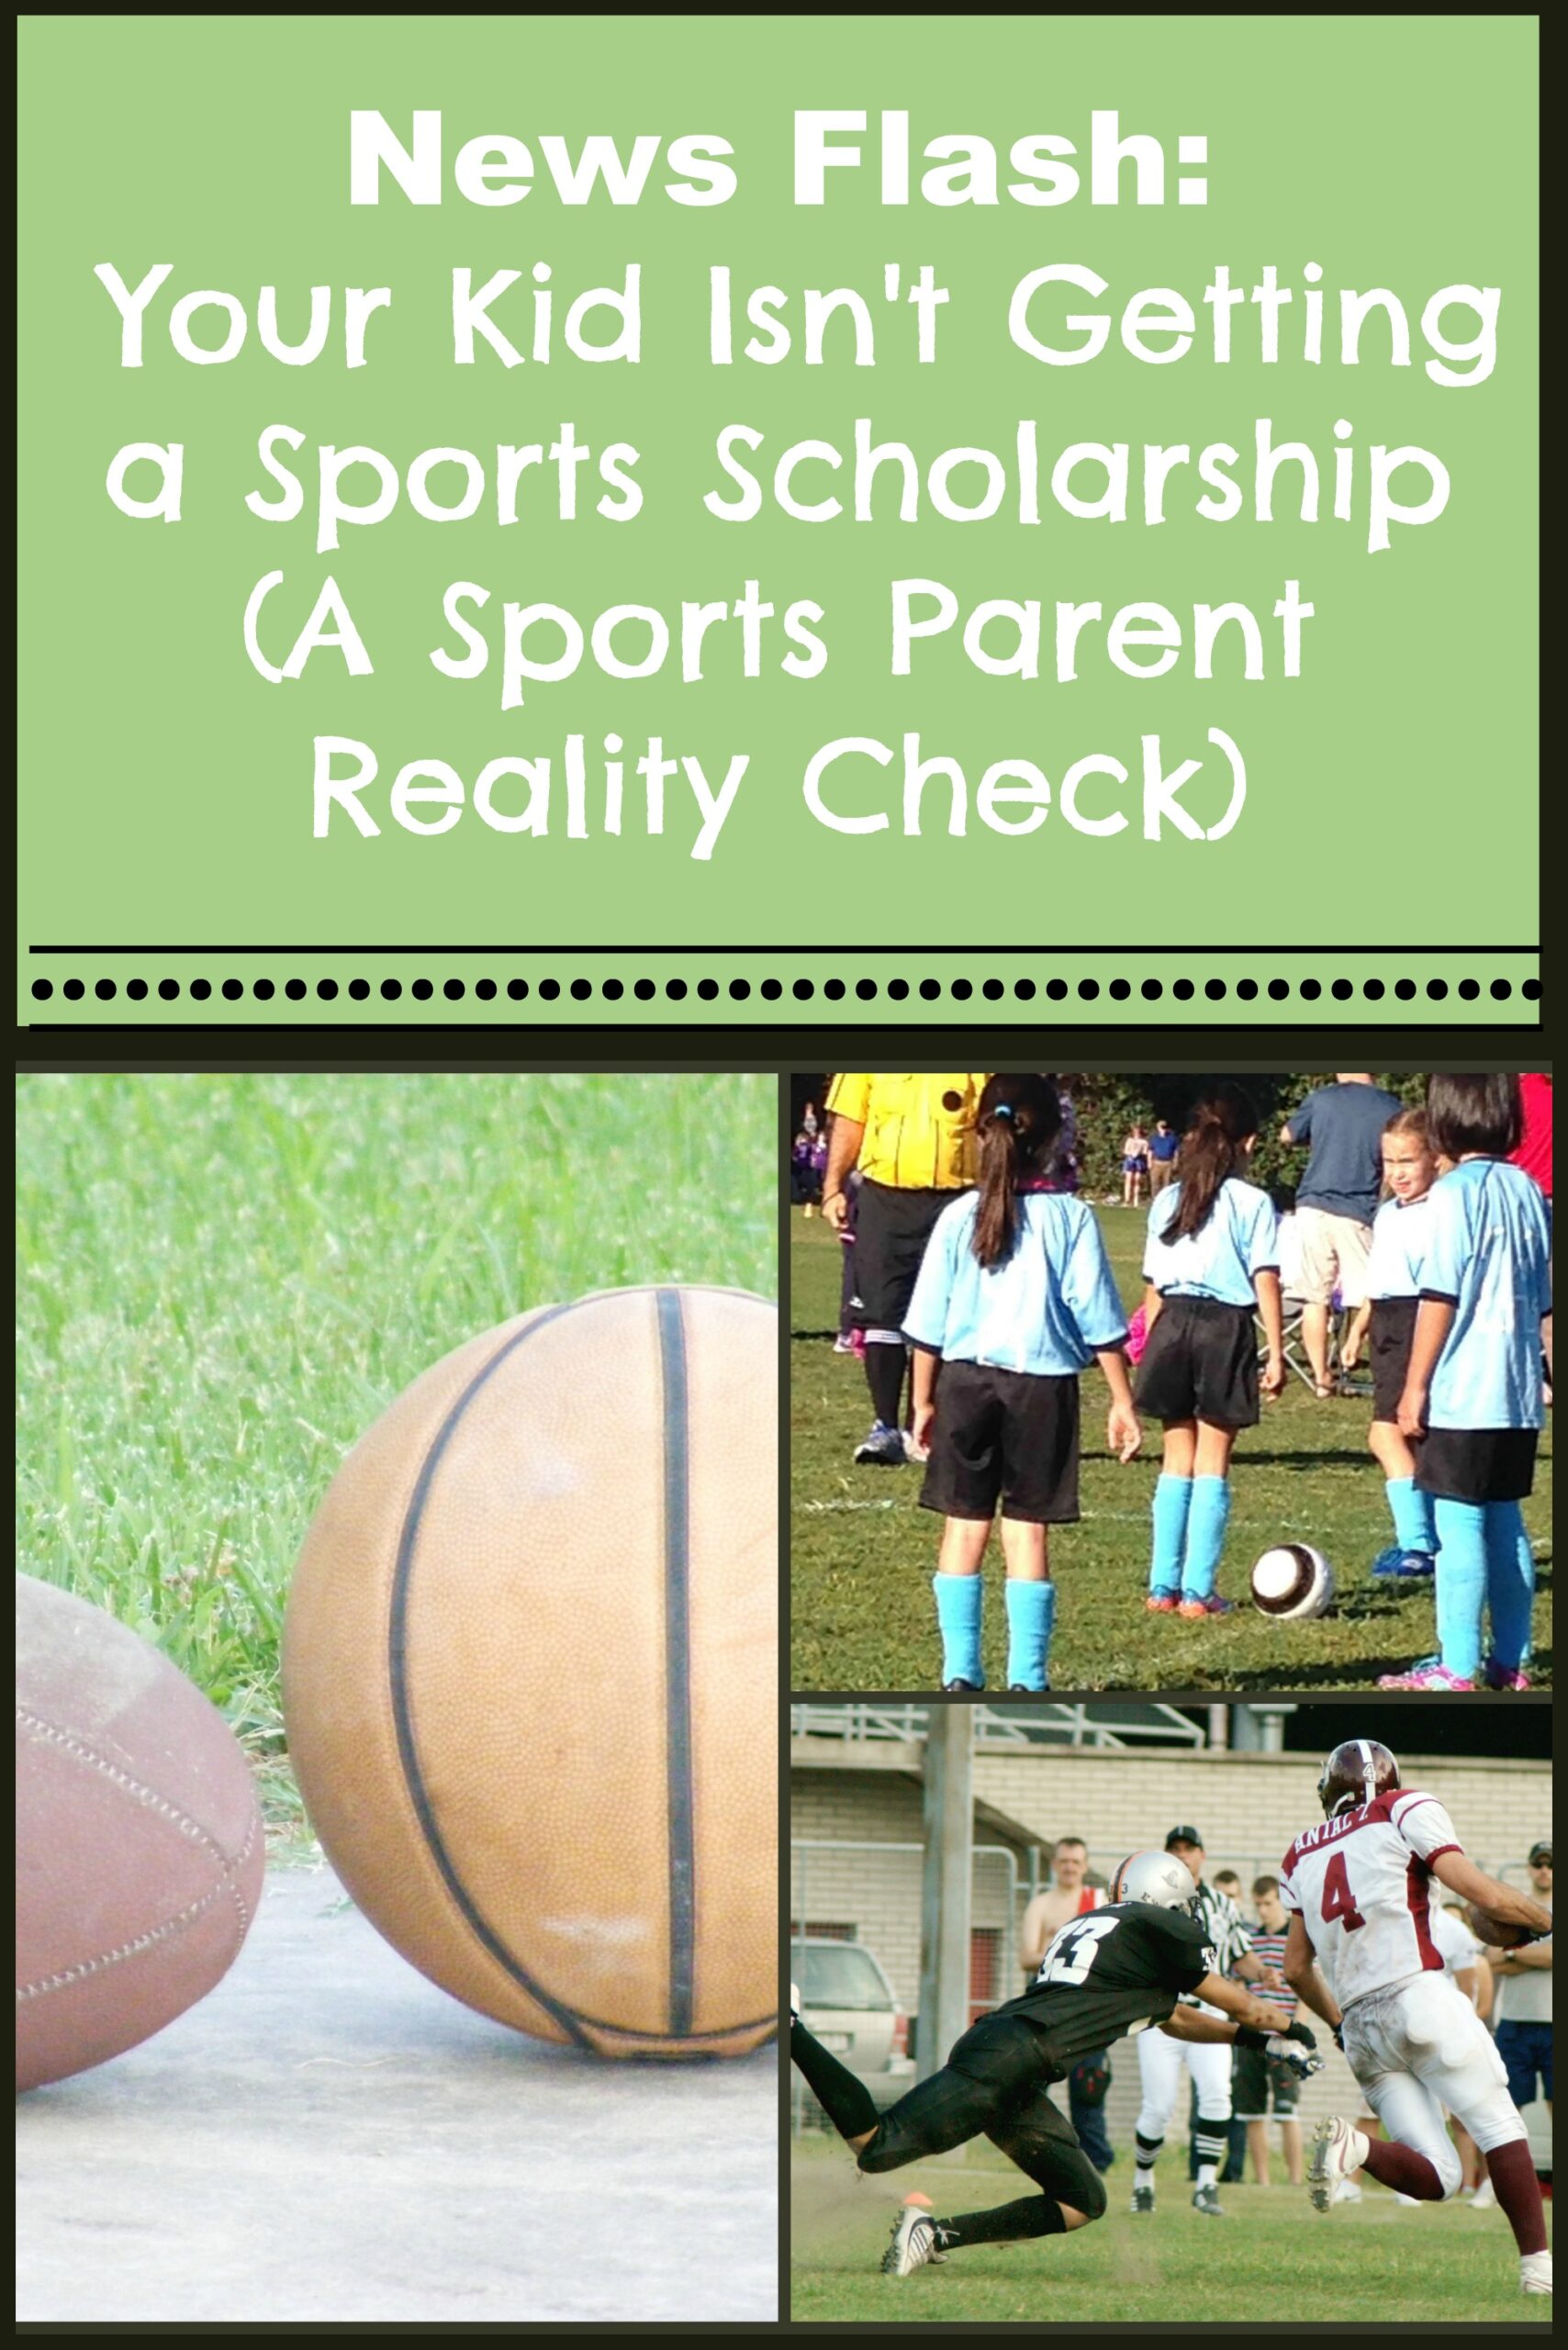 News Flash:  Your Kid Isn’t Getting a Sports Scholarship